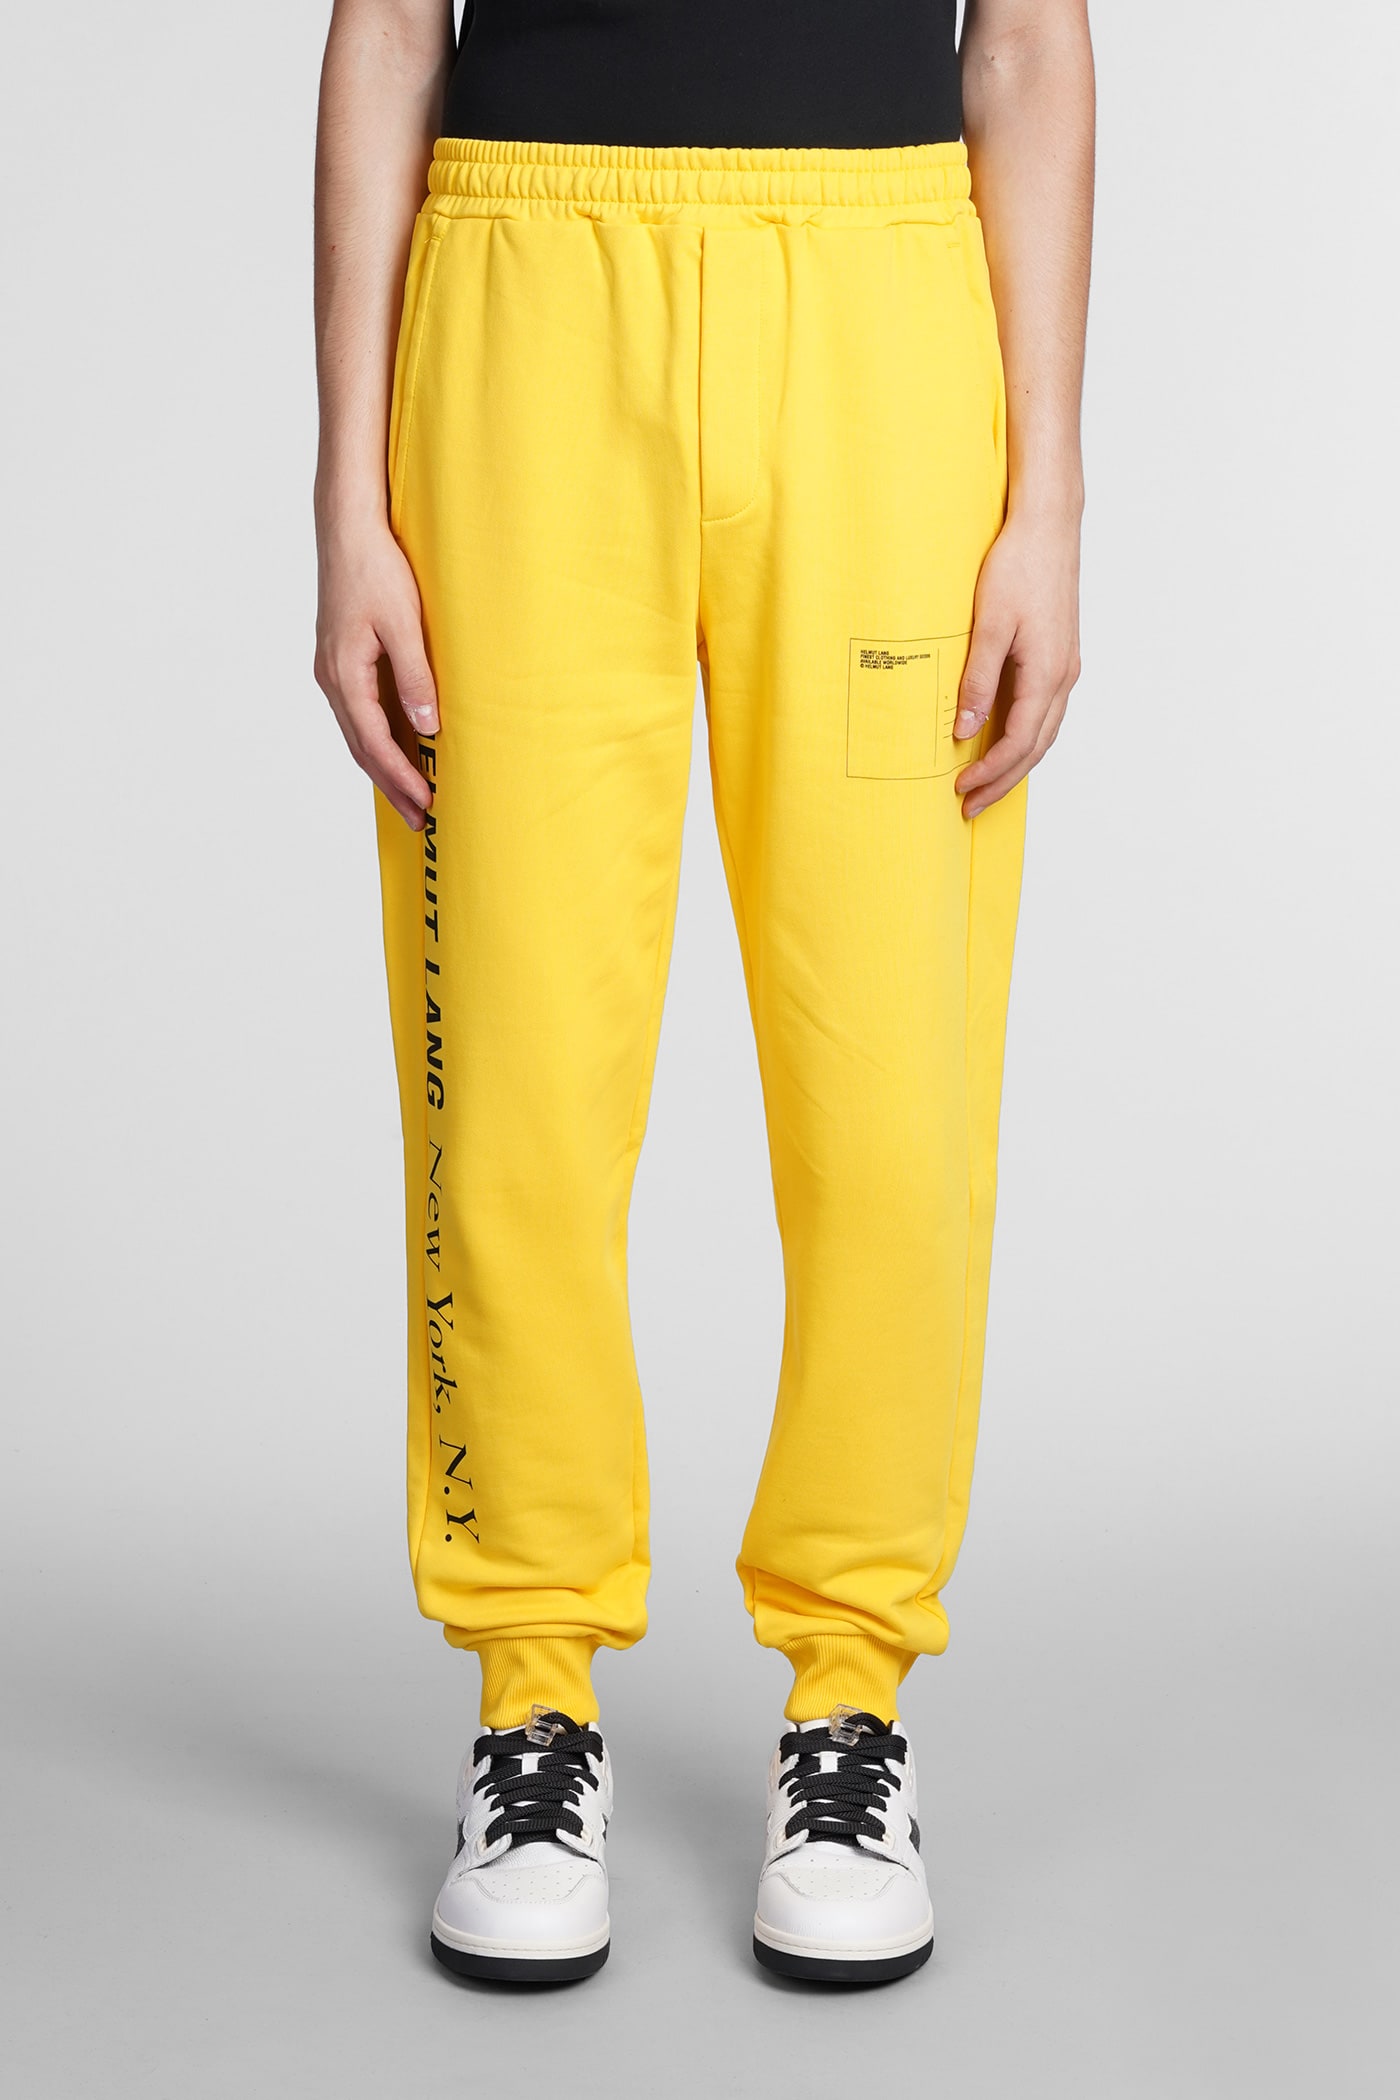 Helmut Lang Pants In Yellow Cotton